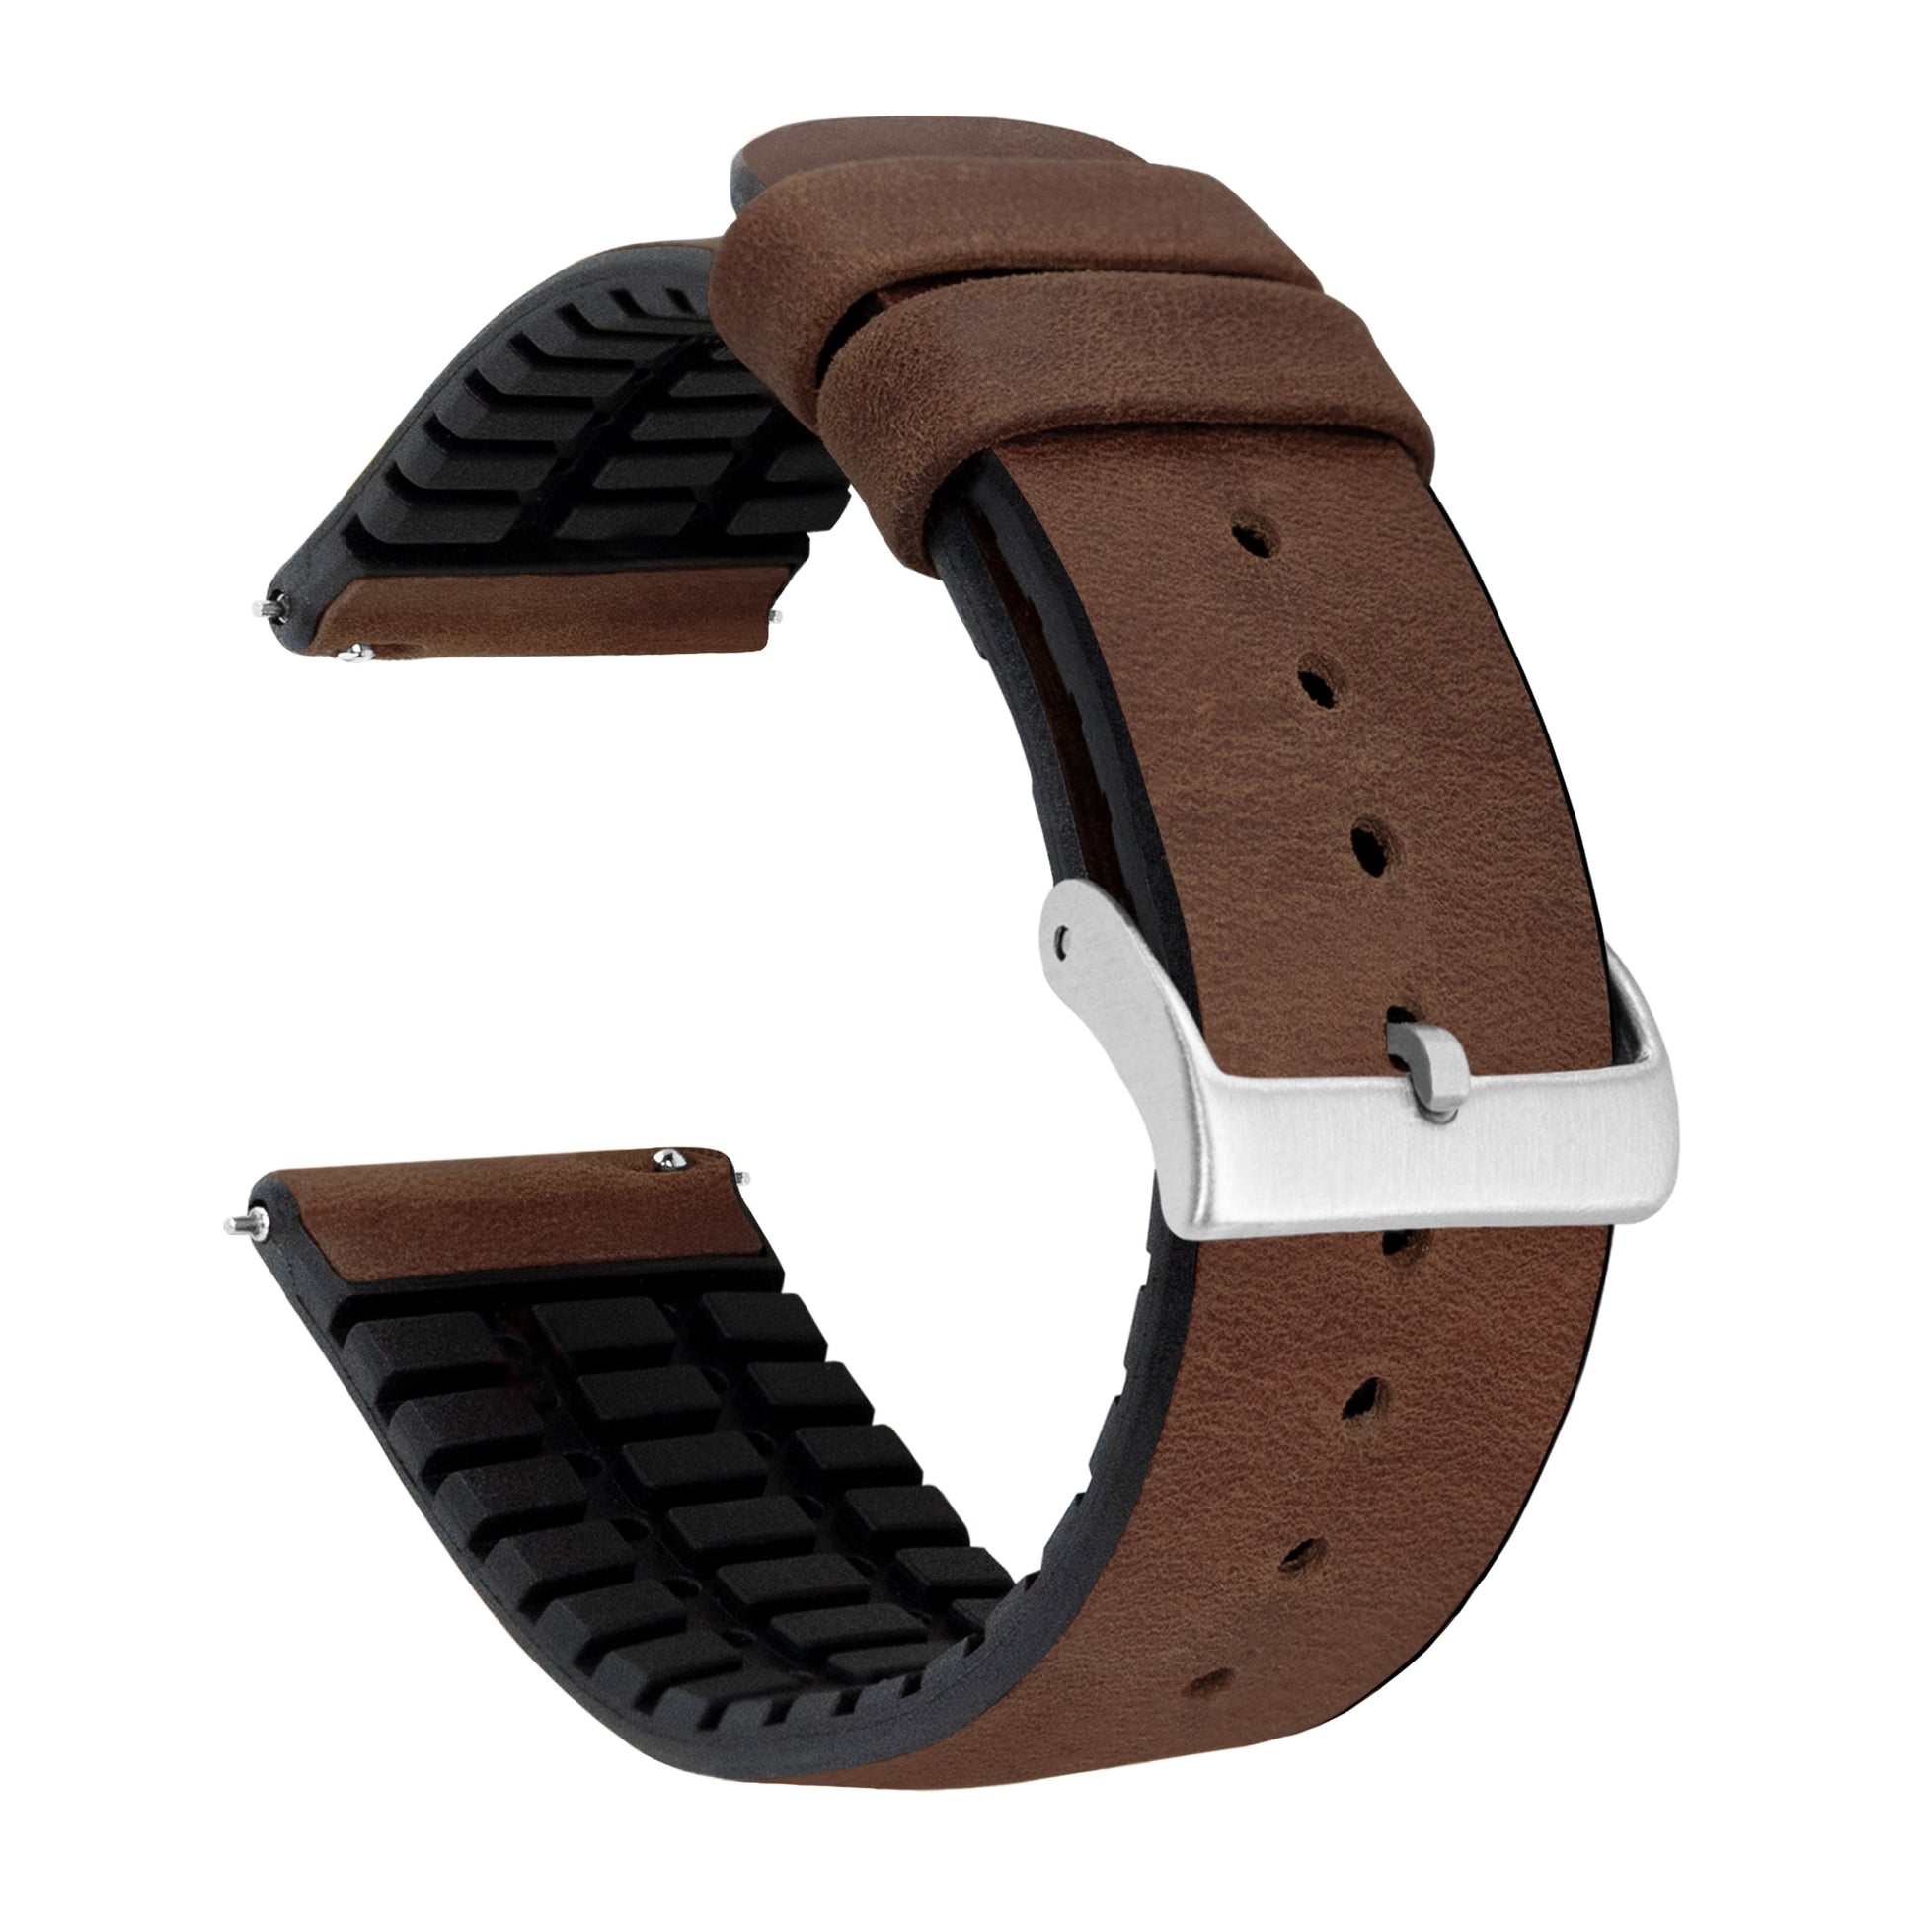 Zenwatch & Zenwatch 2 | Leather and Rubber Hybrid | Walnut Brown - Barton Watch Bands